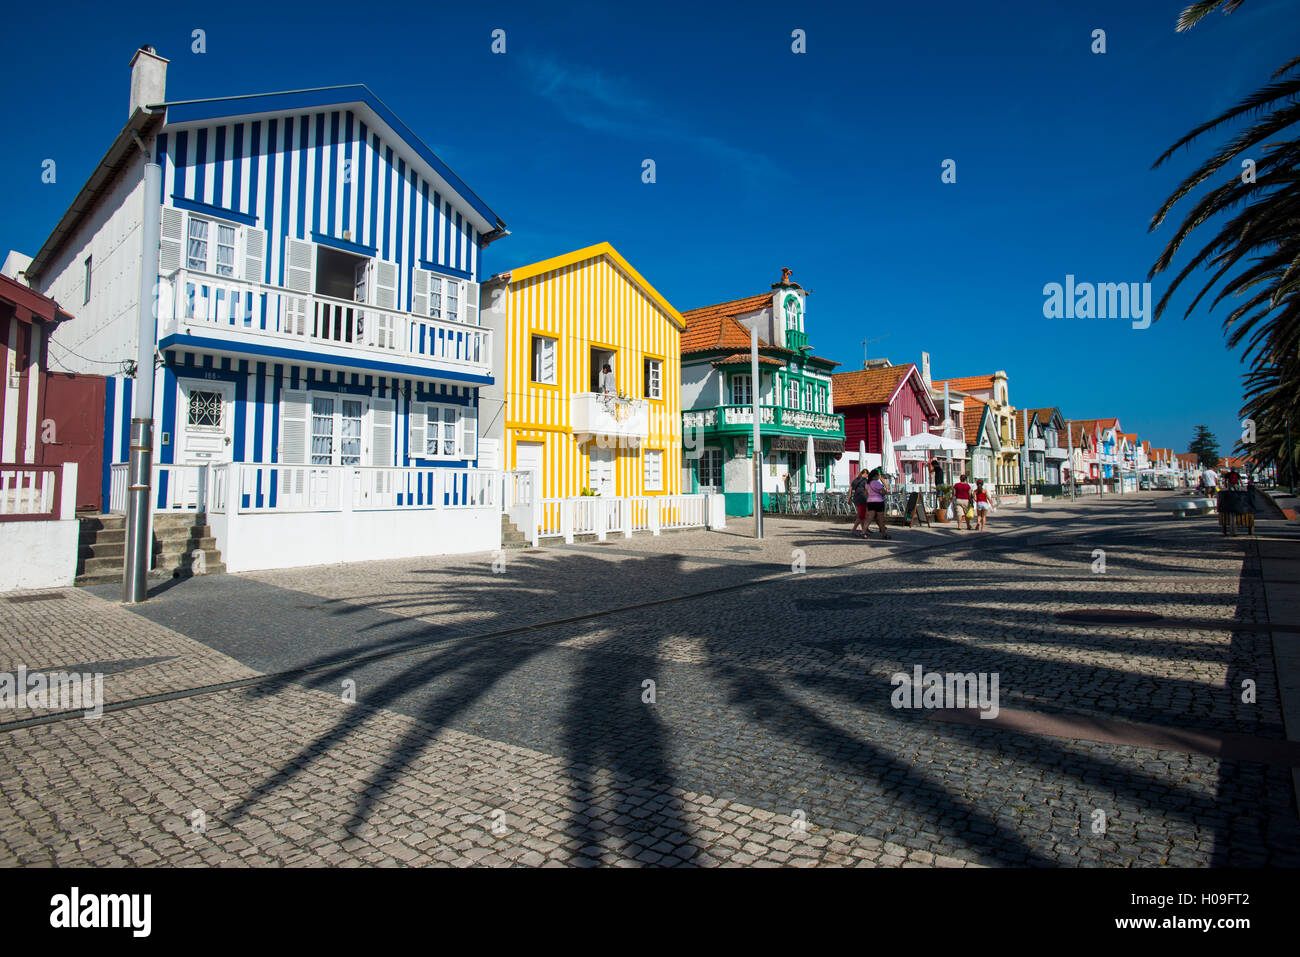 Colourful stripes decorate traditional beach house style on houses in Costa Nova, Portugal, Europe Stock Photo